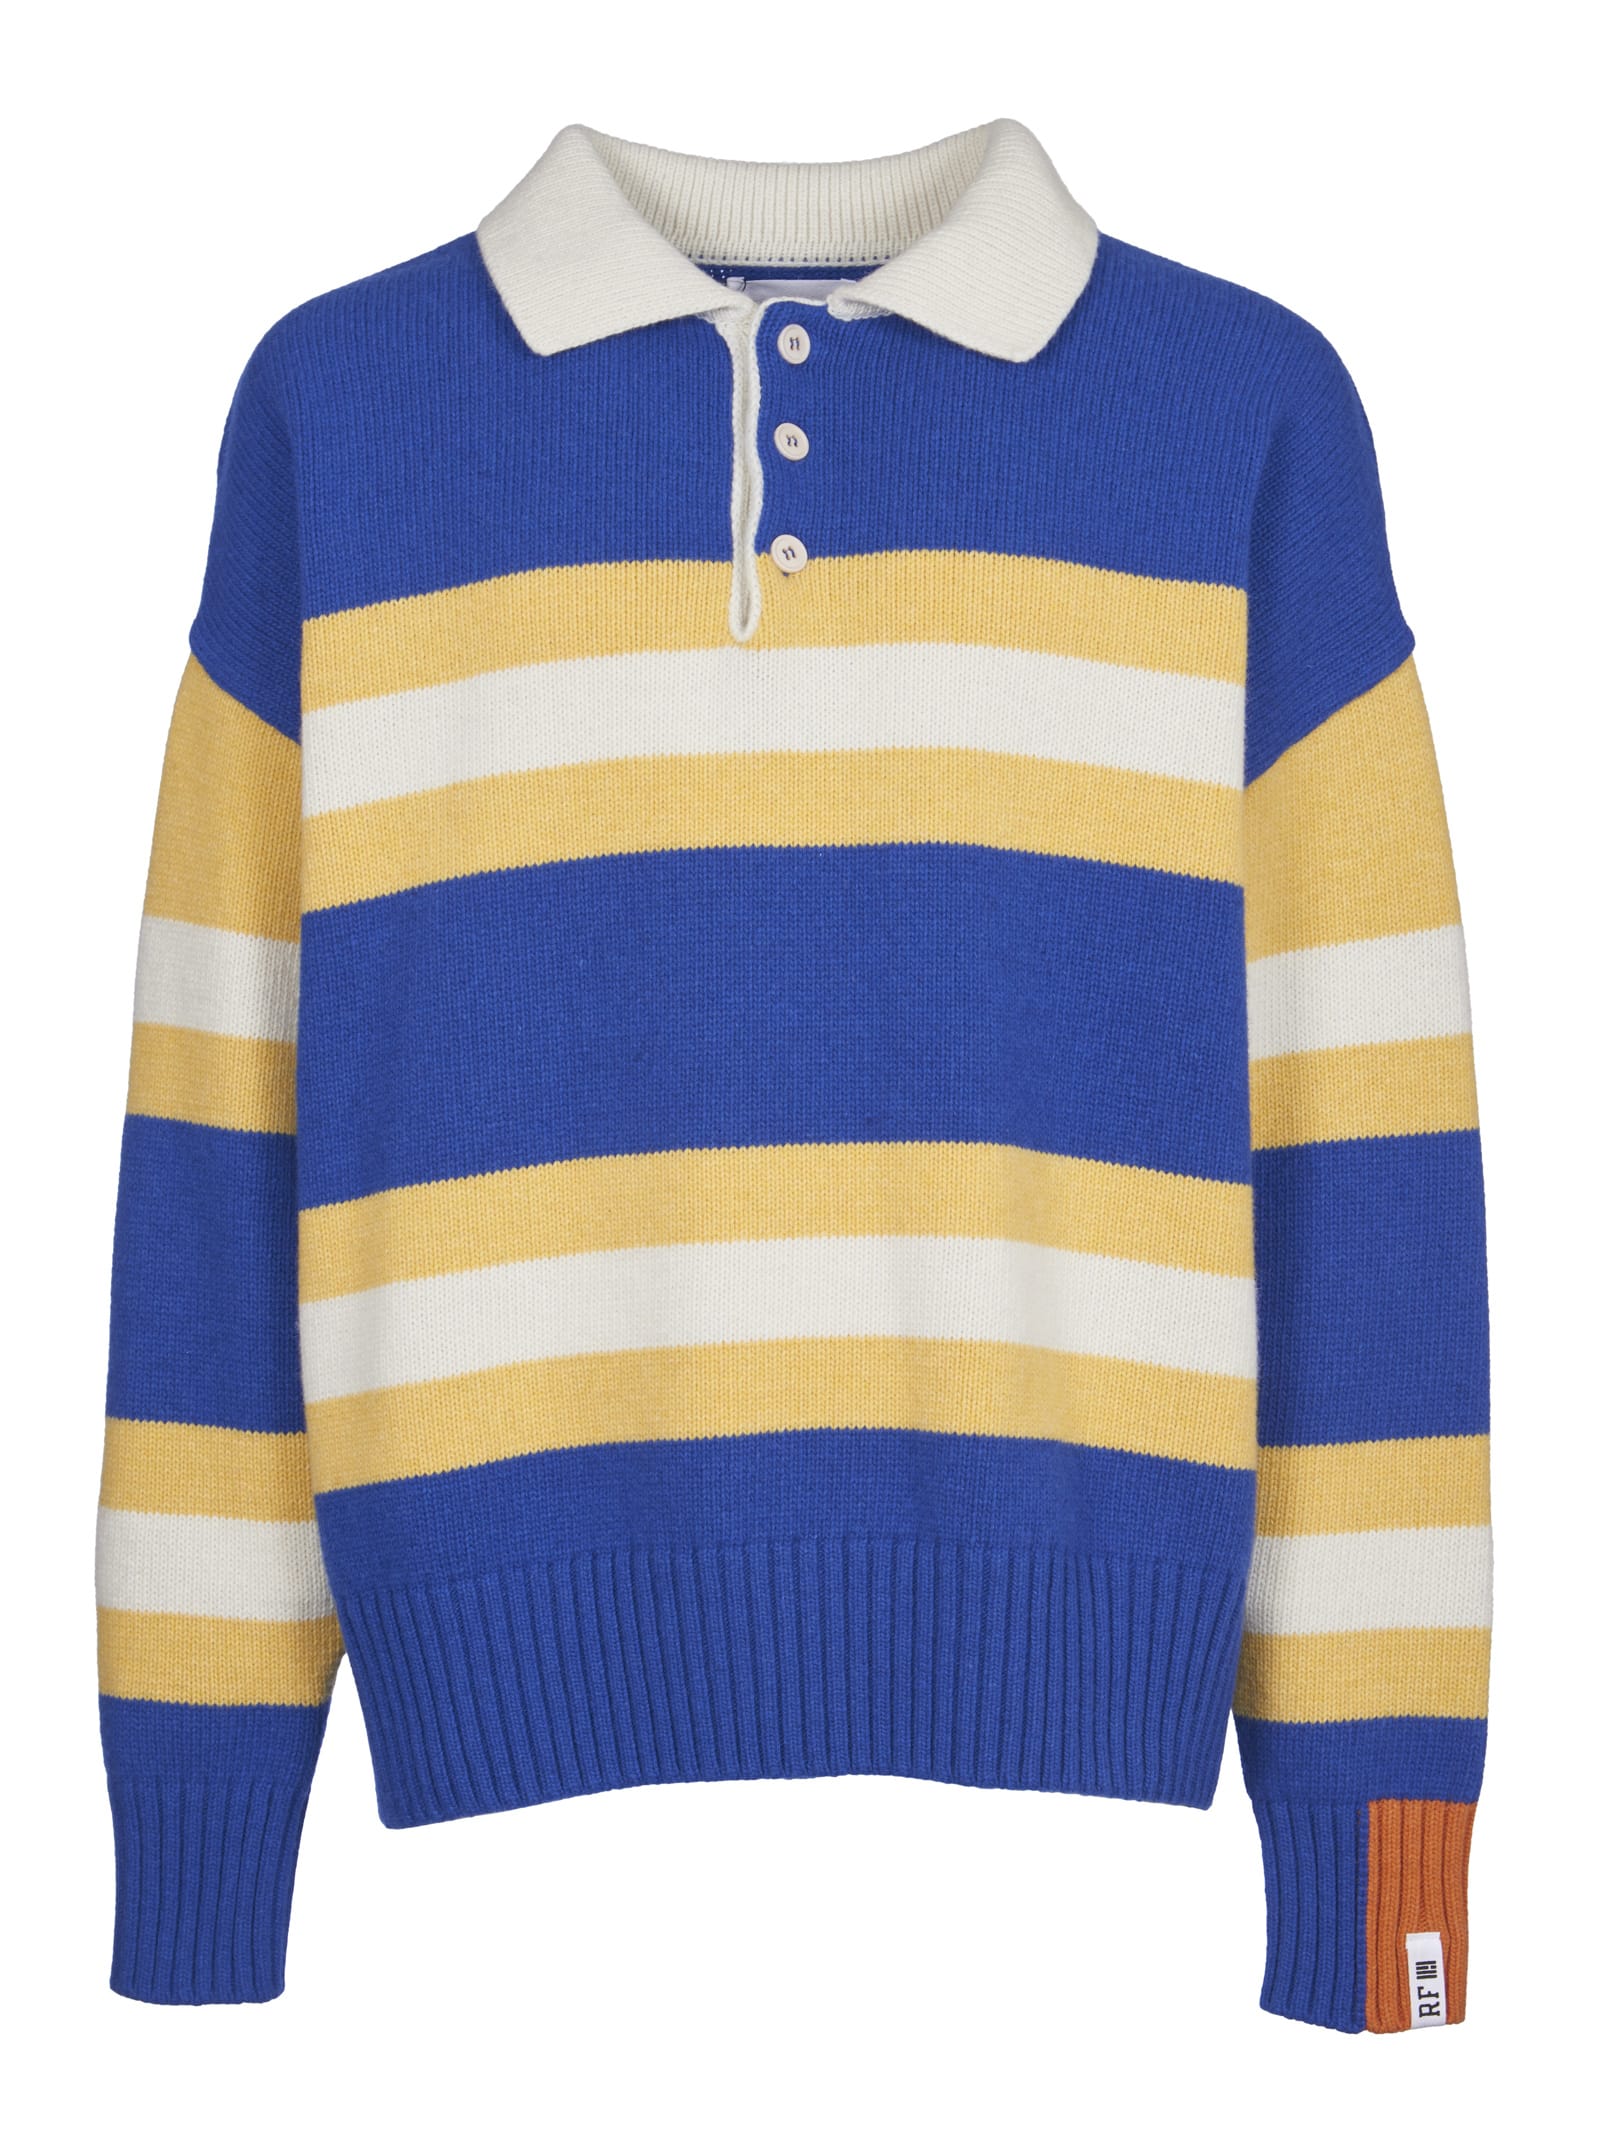 Right For Striped Polo Sweater